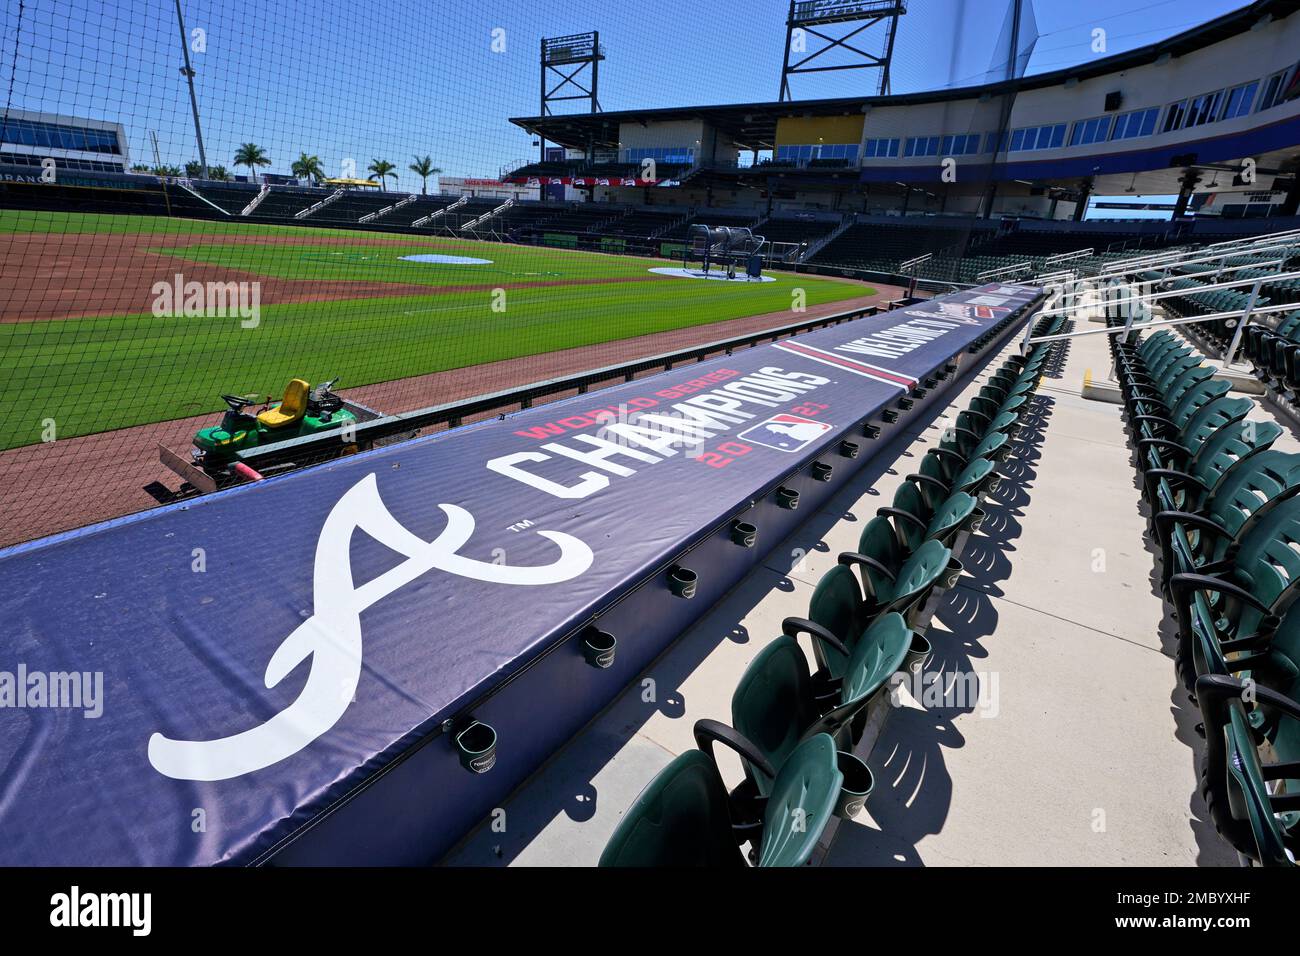 The CoolToday baseball park is ready for the Atlanta Braves for